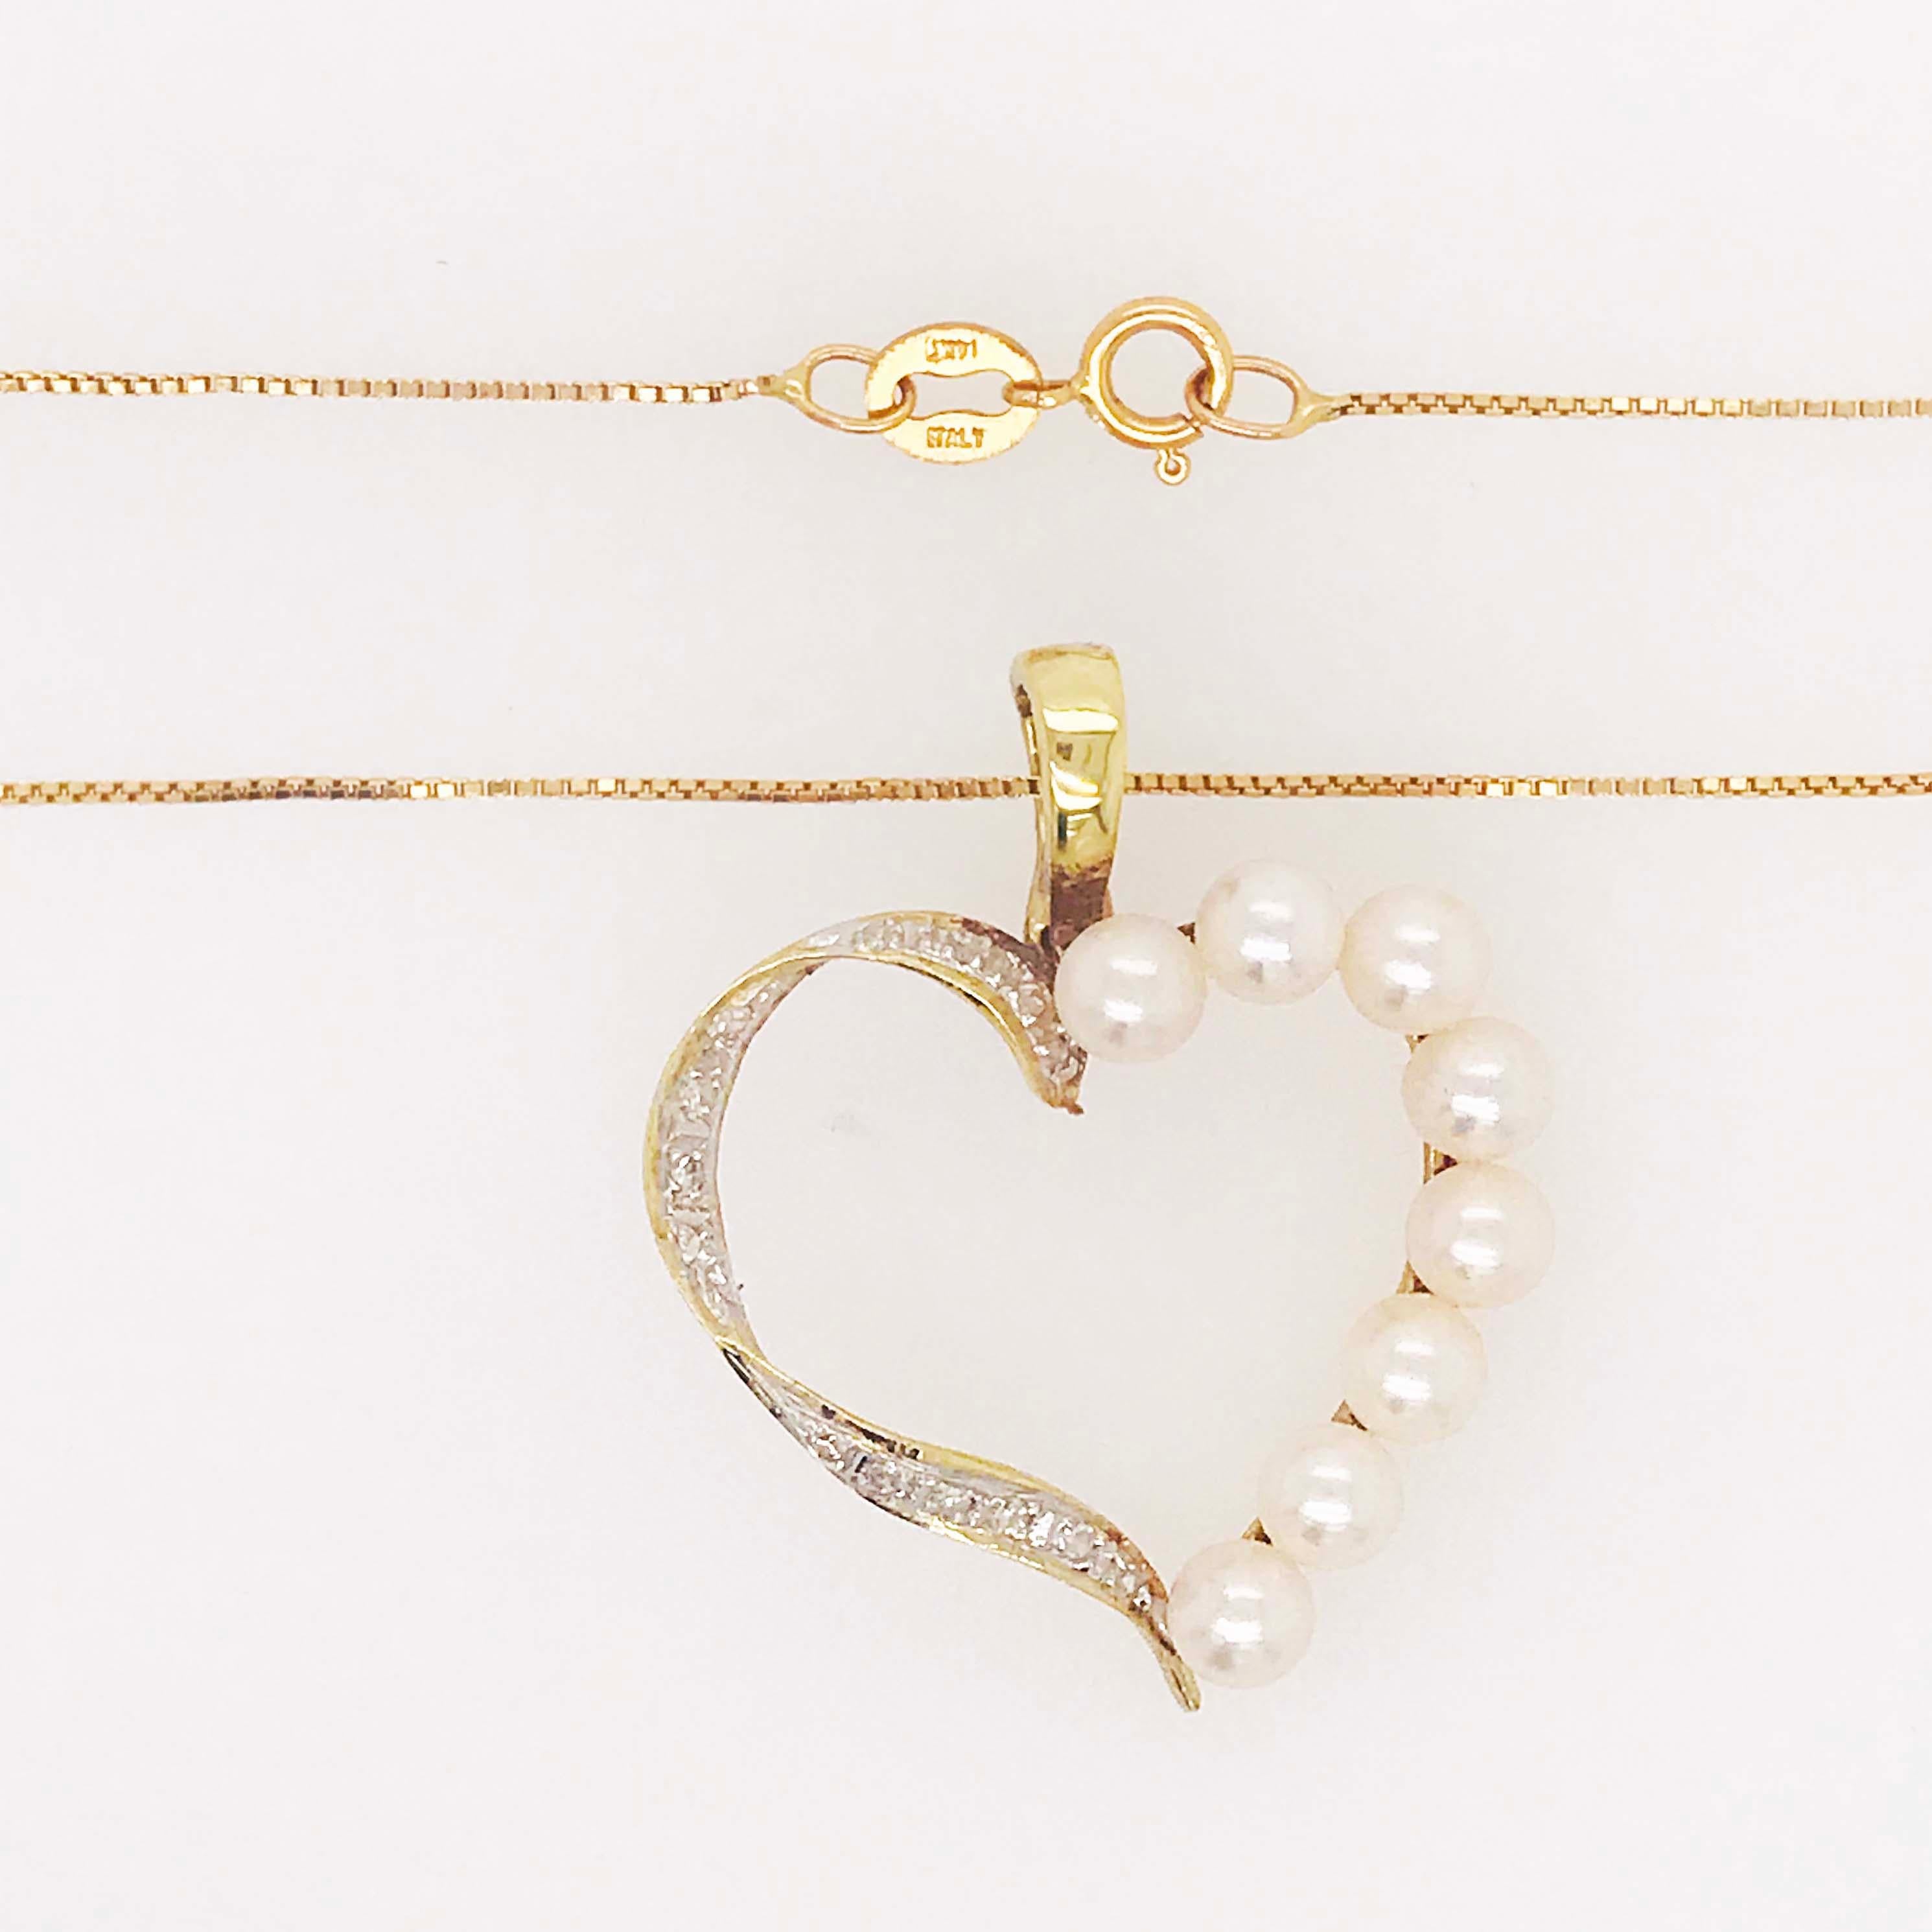 This beautiful genuine diamond and pearl heart necklace is so sweet! The heart shape necklace enhancer has an open design with diamonds covering the left side of the heart. The diamonds are set on top of a ribbon-like design. There is an estimate